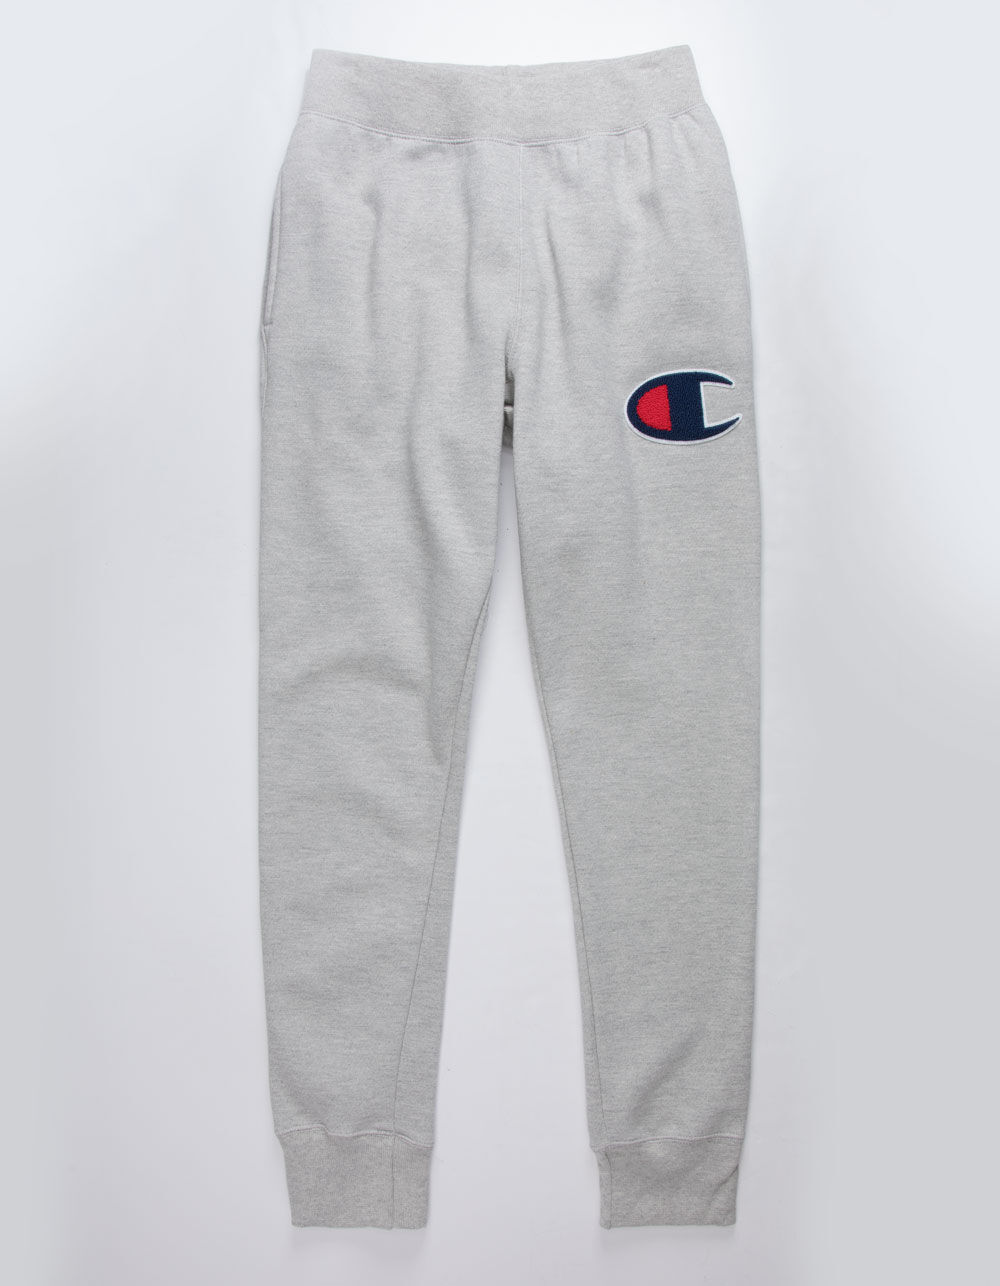 Champion Sweatpants Womens Large Gray Revere Weave Logo Spell Out